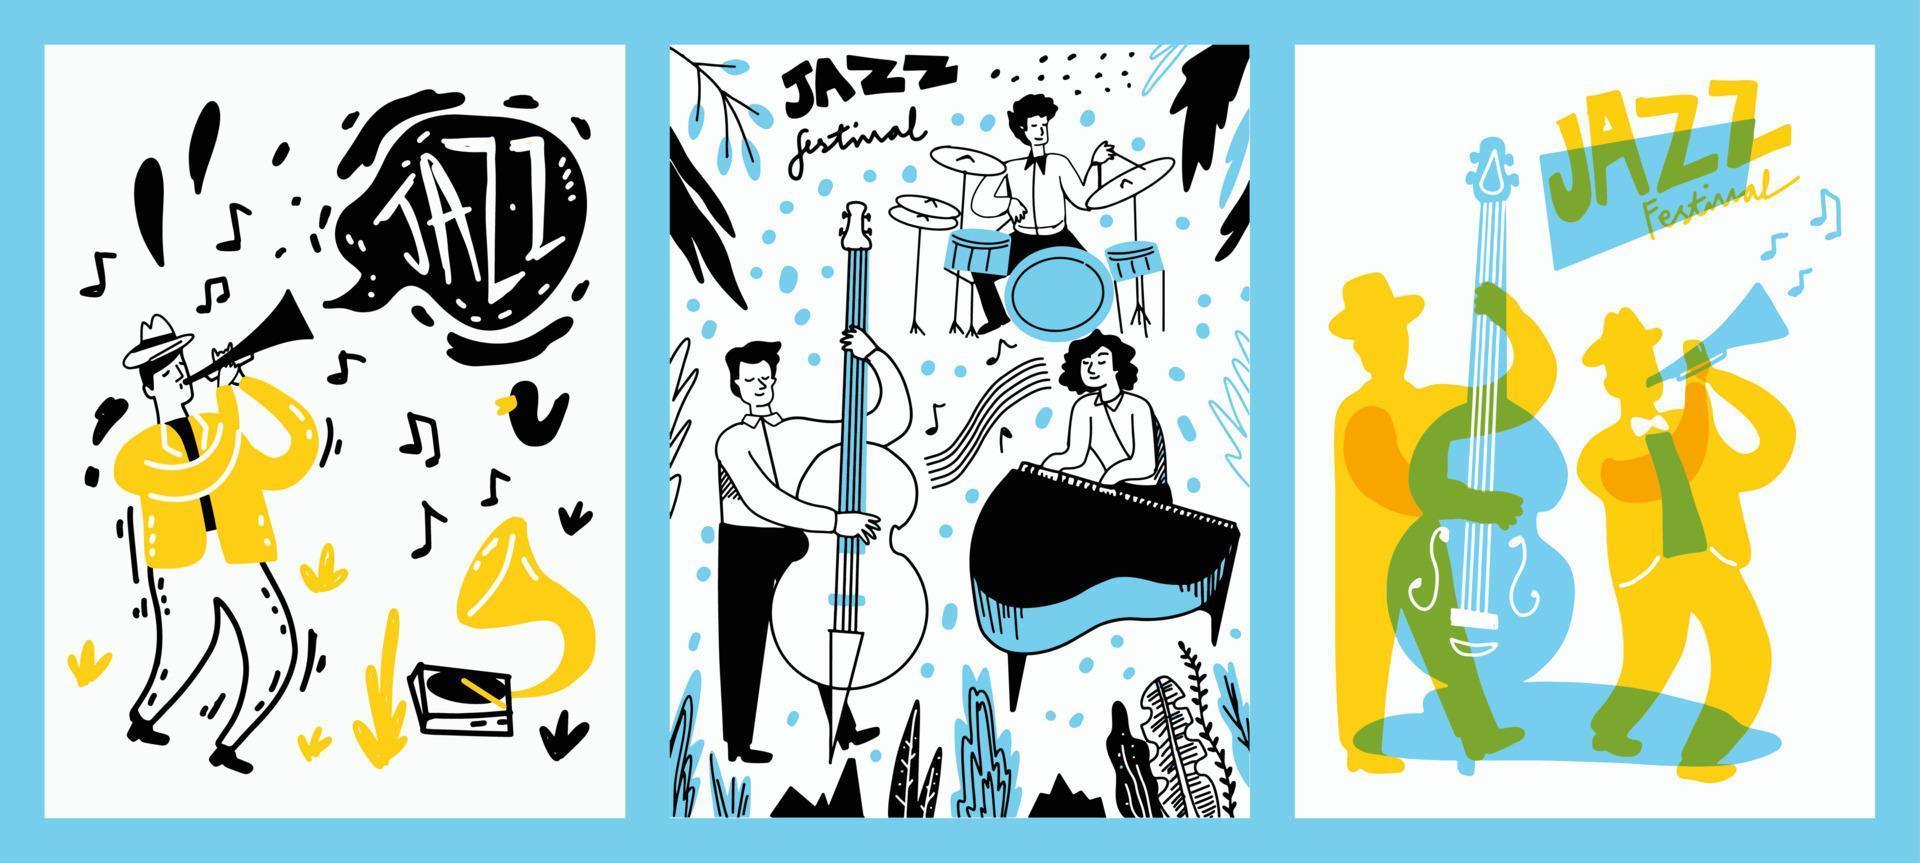 Jazz music festival cover poster concept. Man play instrument vector illustration.